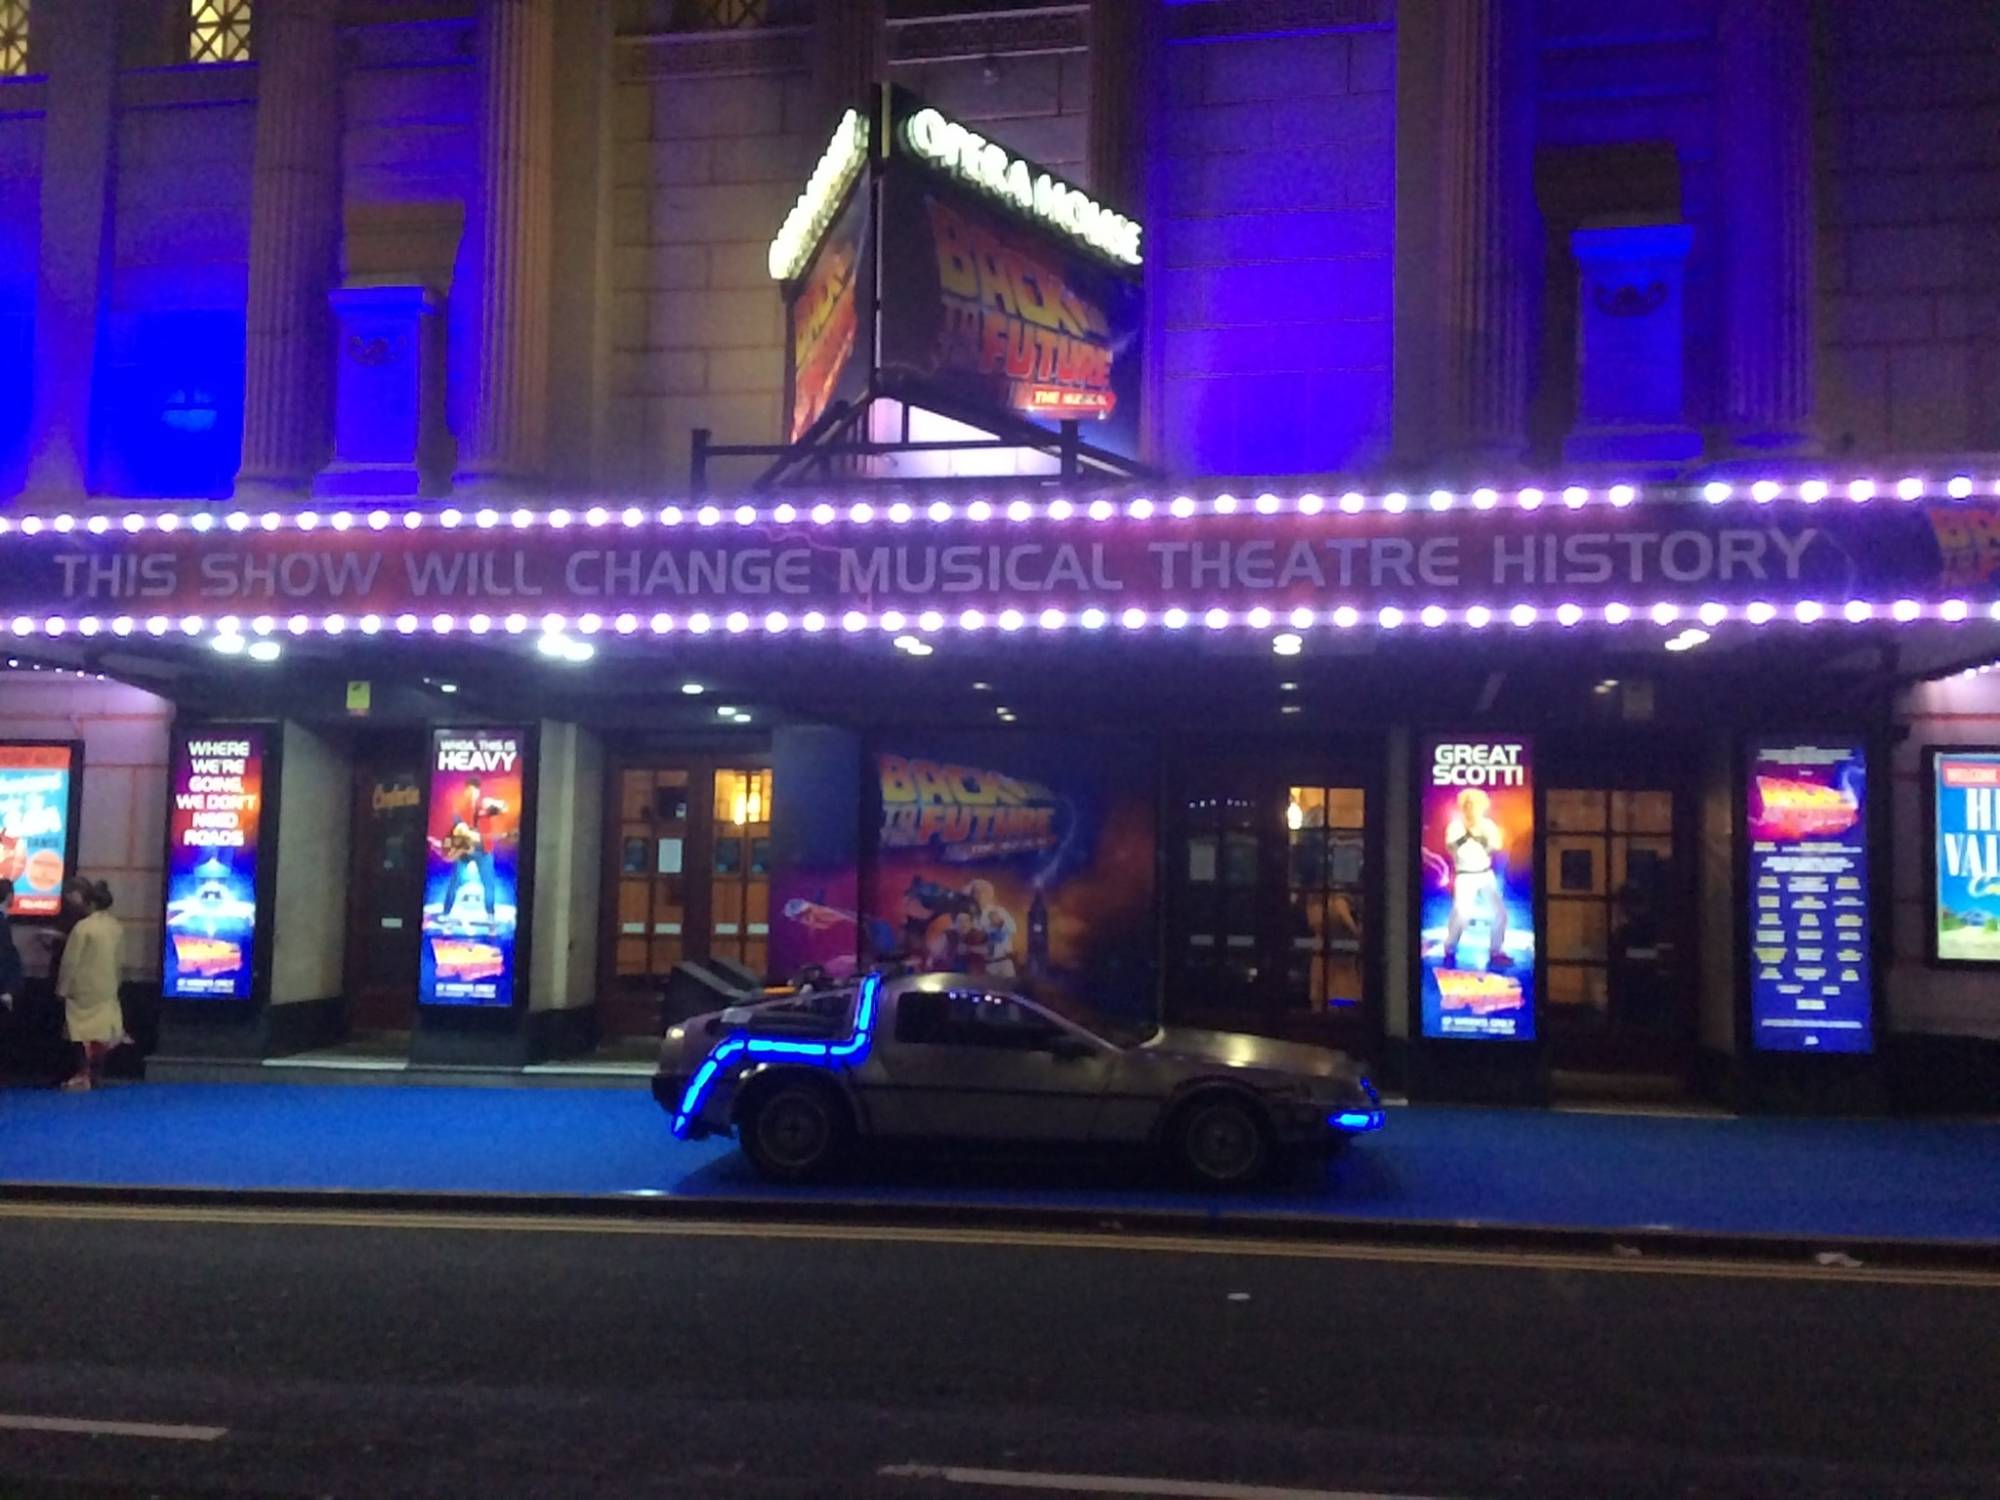 The BTTF Car parked outside the BTTF Musical